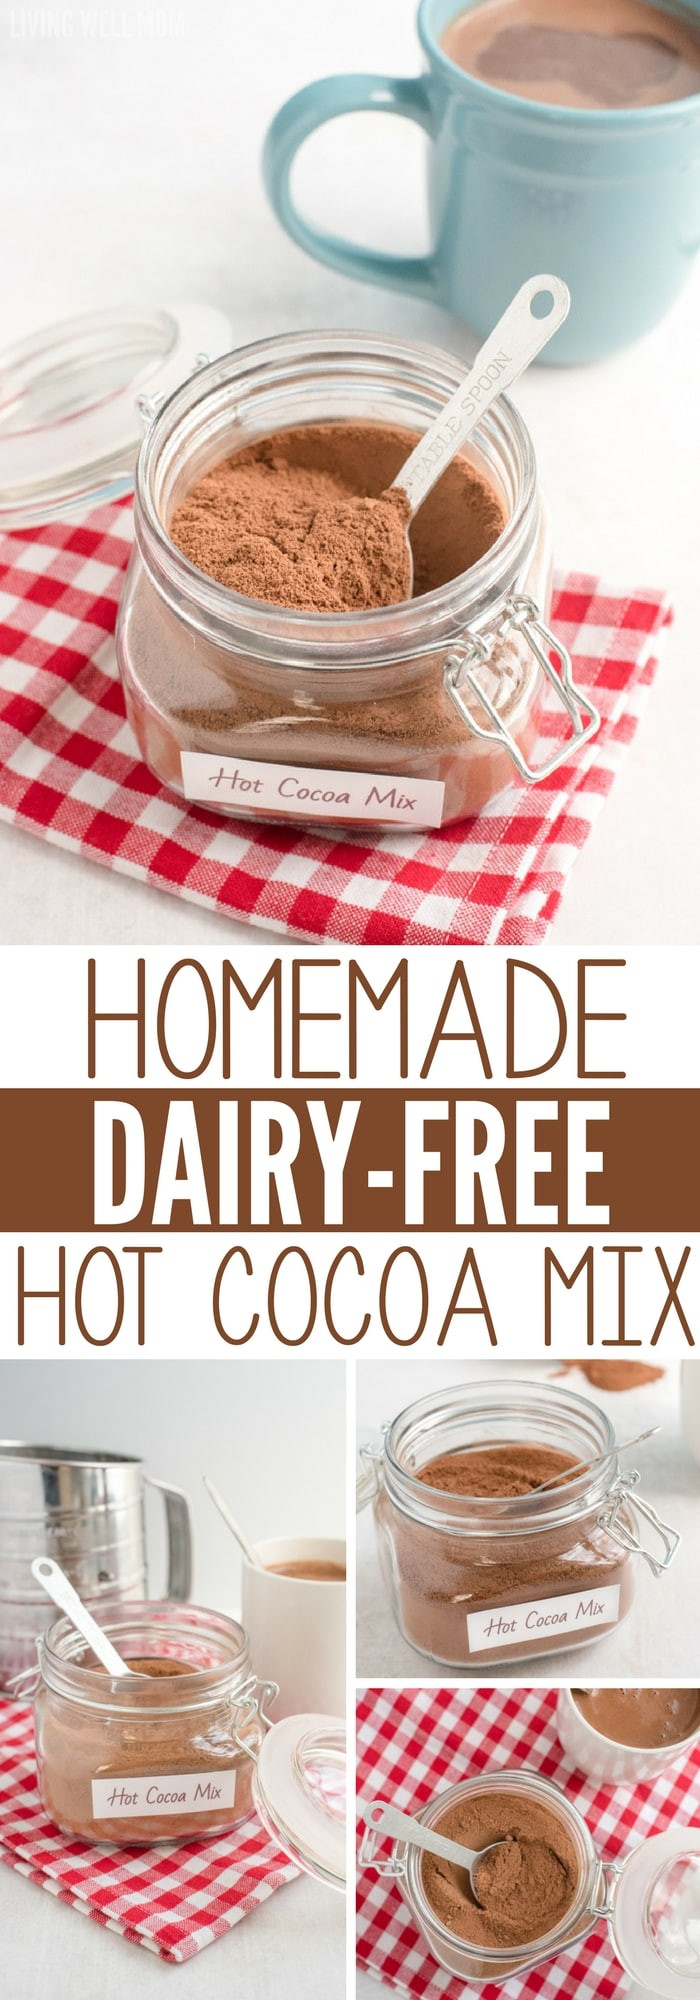 Does Cocoa Powder Have Dairy
 Homemade Hot Cocoa Mix for Kids Dairy Free